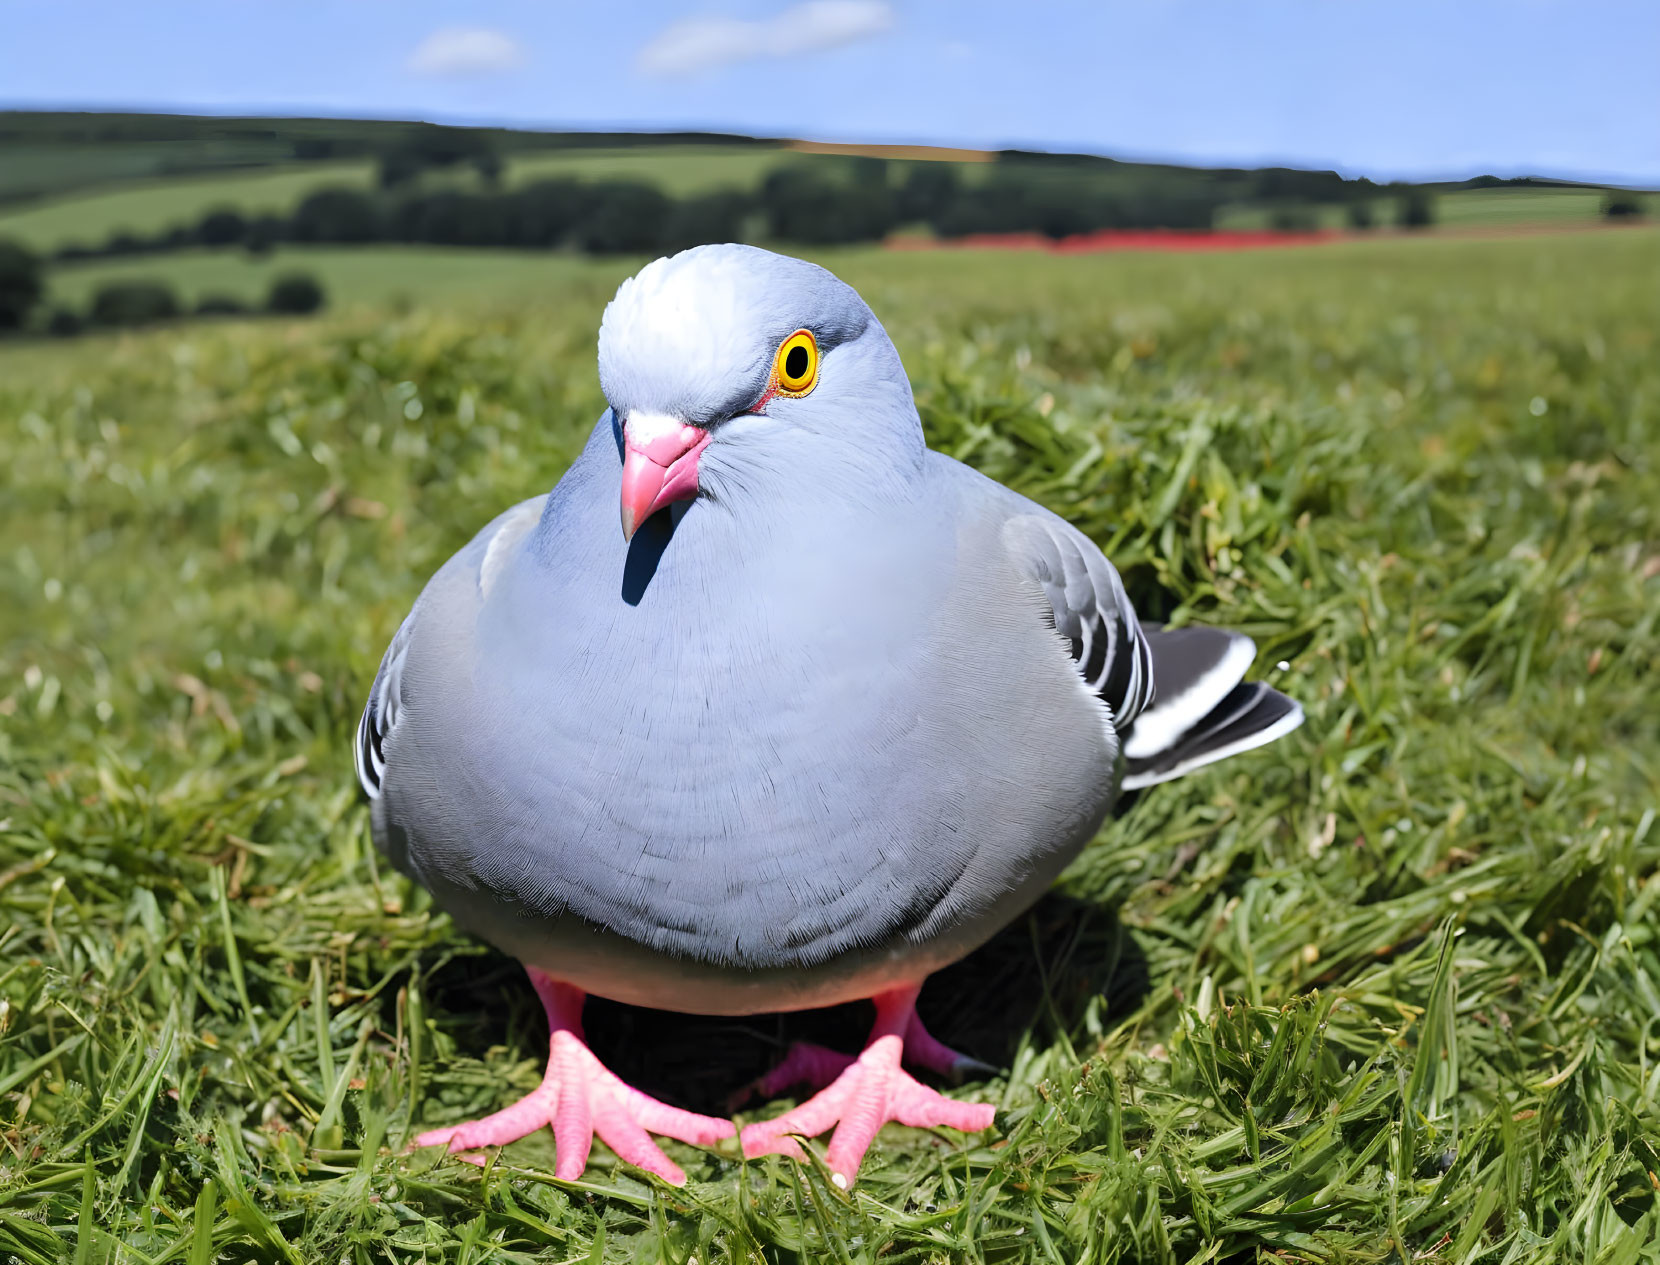 a cute pigeon with big eyes in grass 